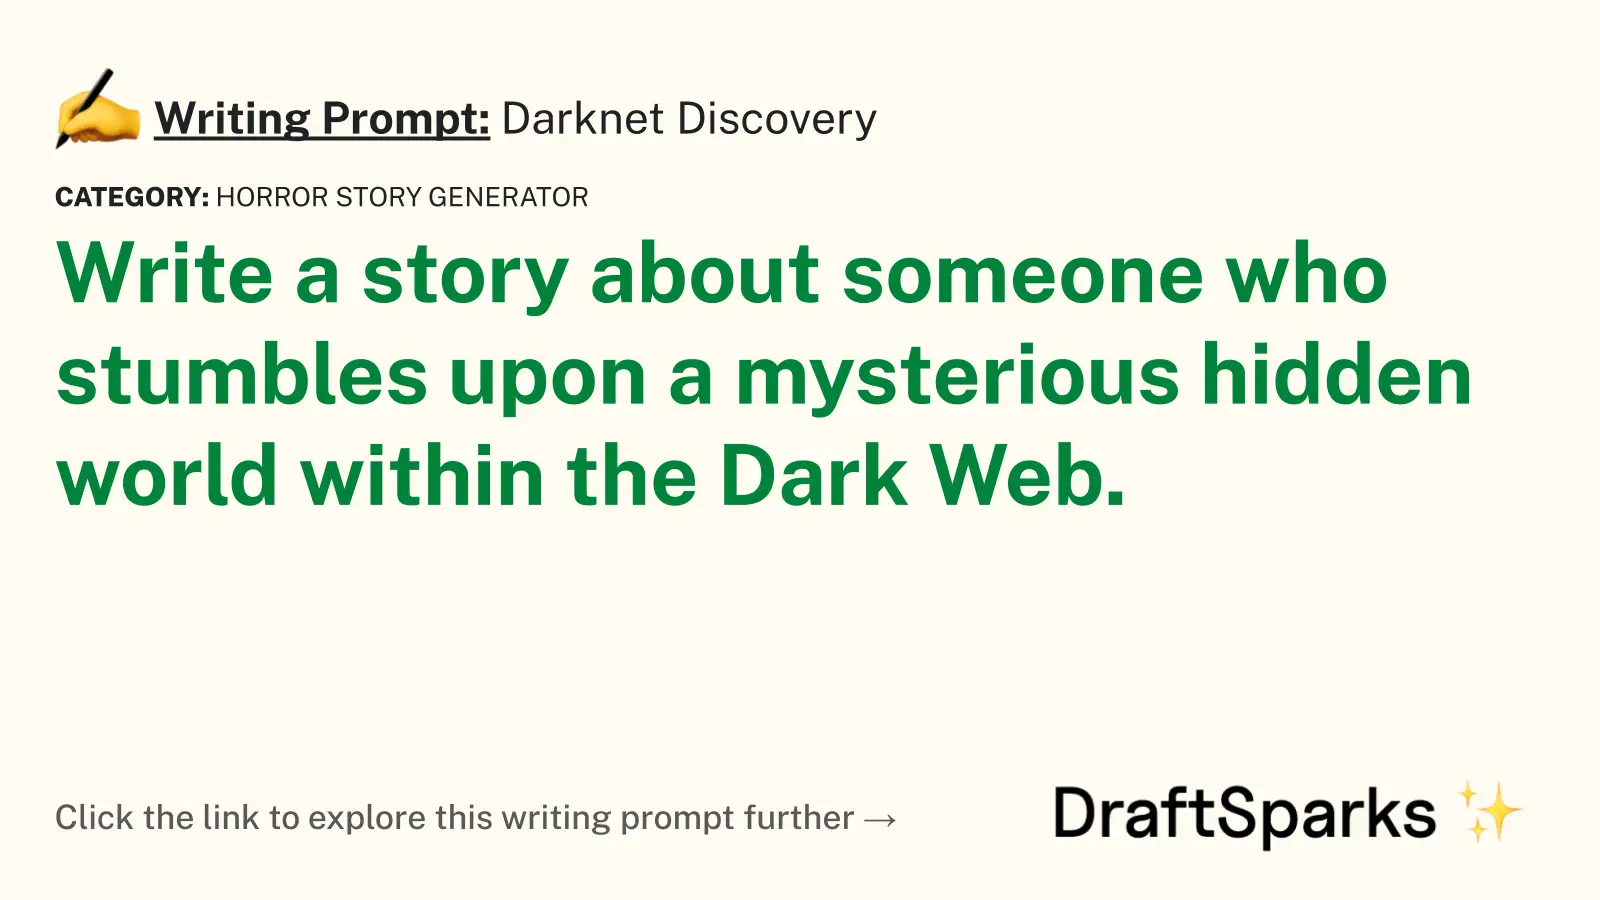 Darknet Discovery